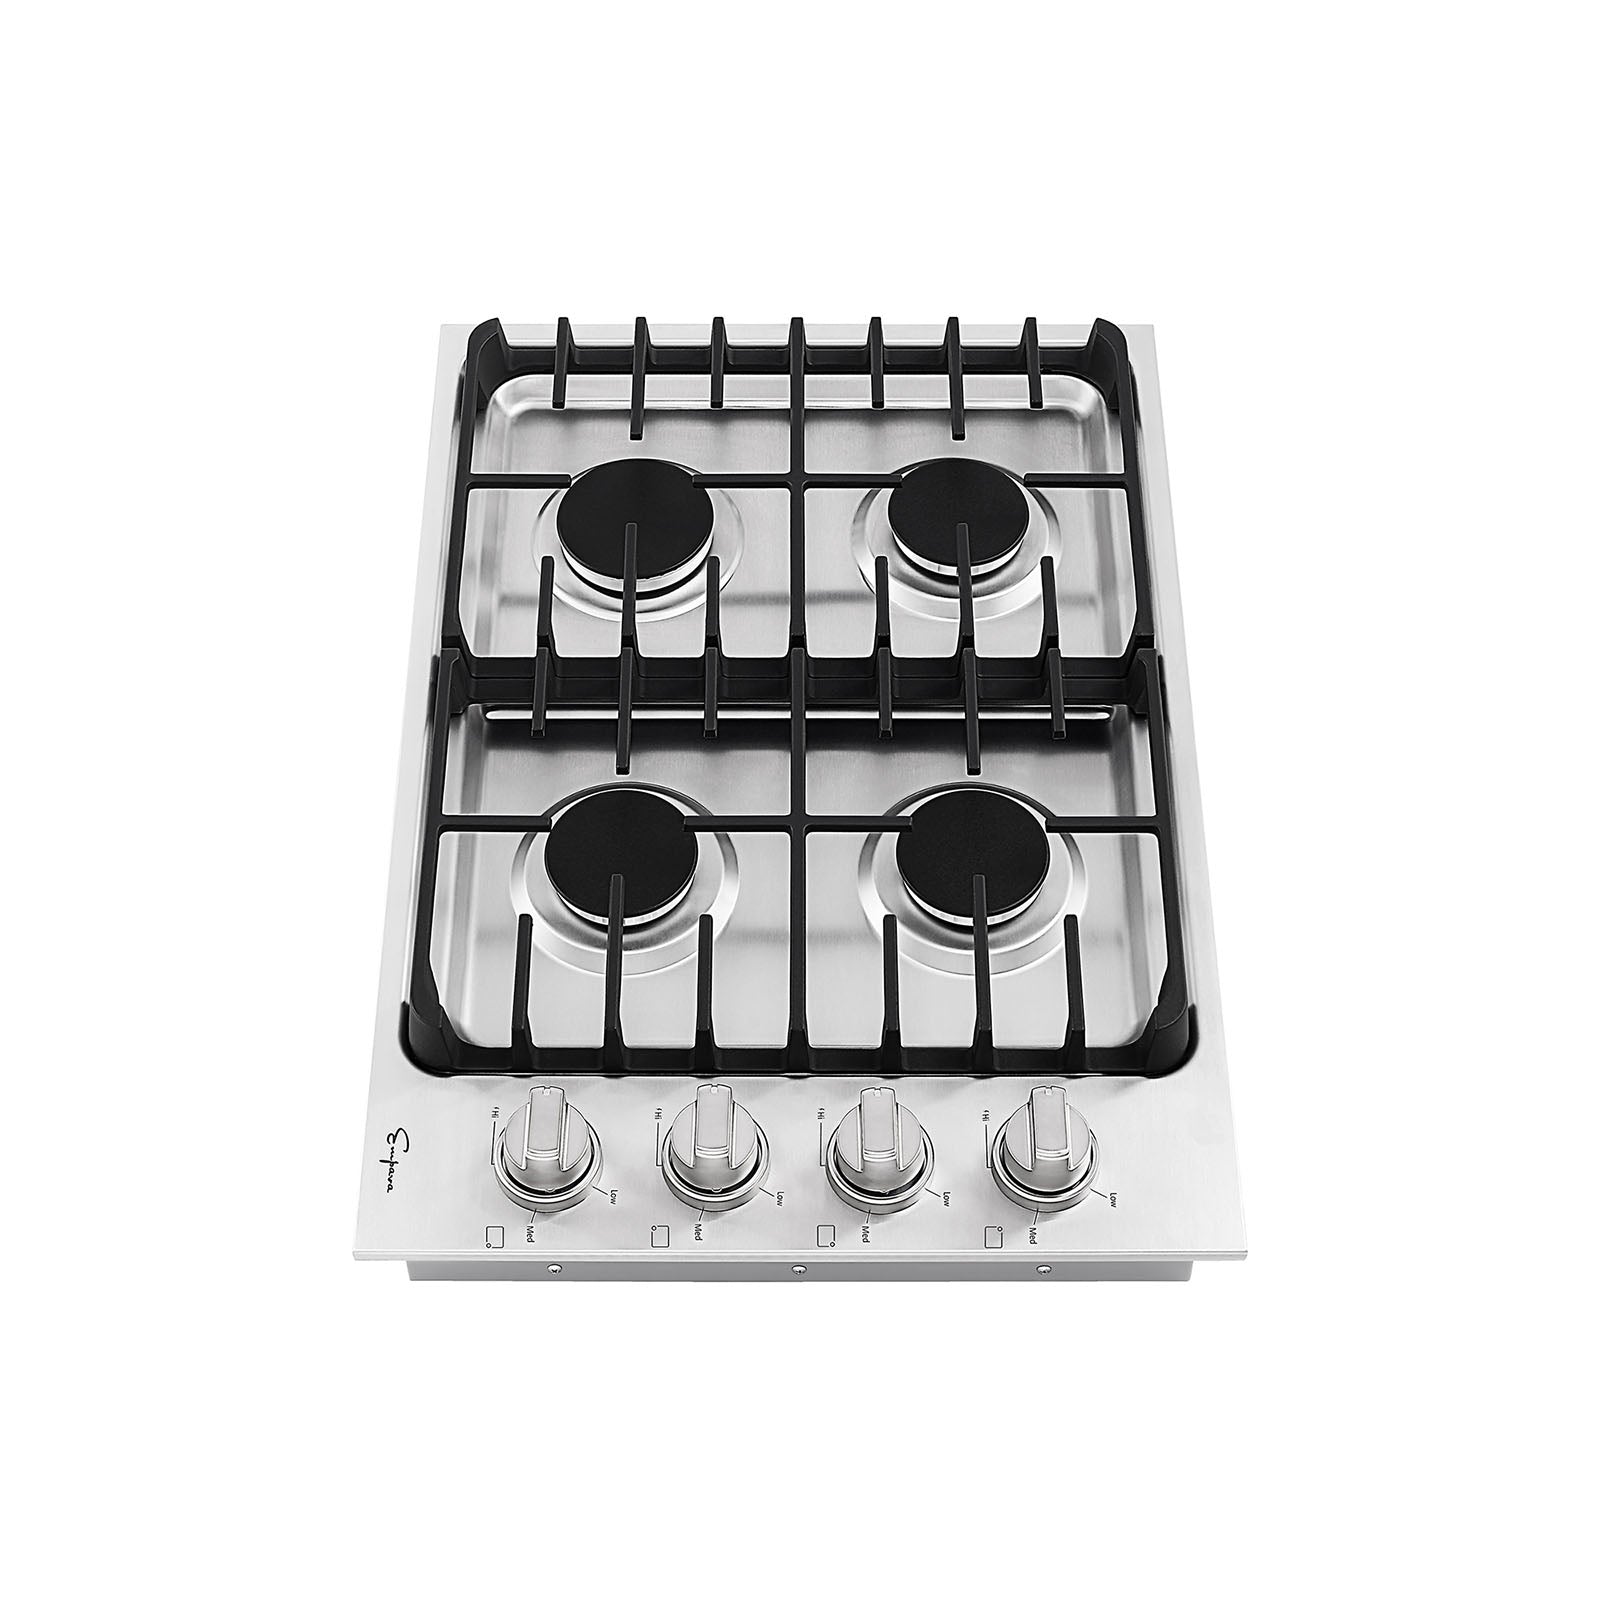 Empava 30GC33 30 in. Built-in Stainless Steel Gas Cooktop